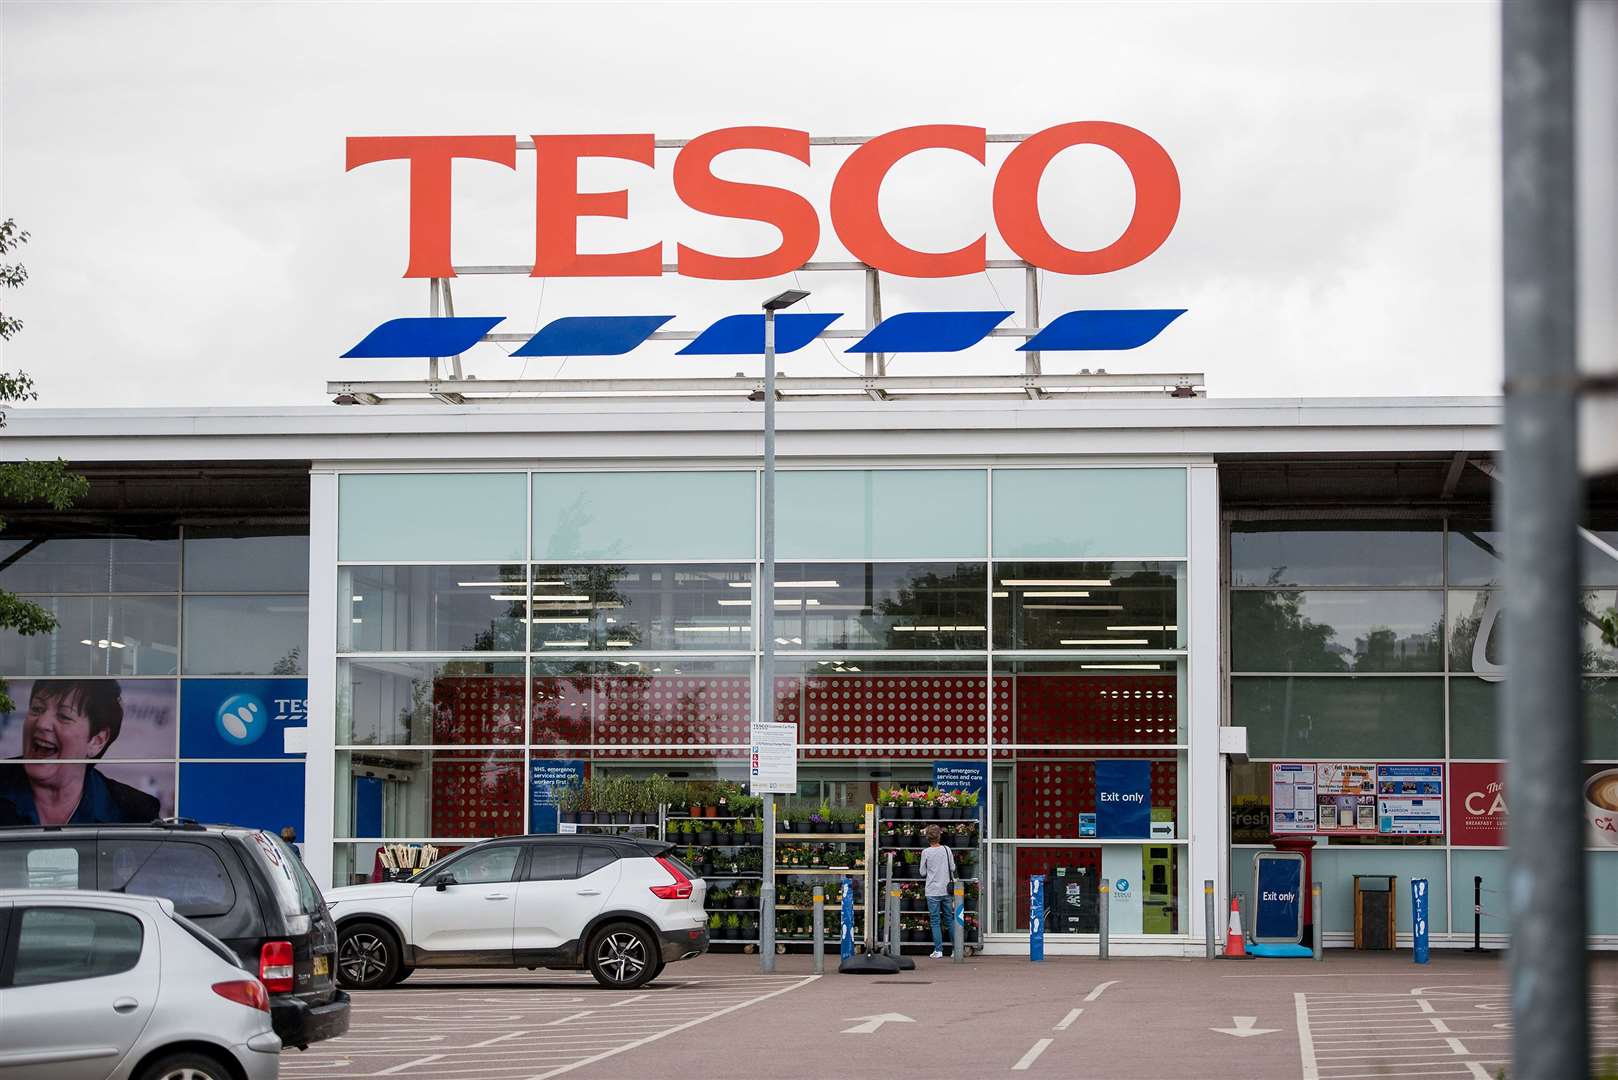 Tesco has hit back and says all Clubcard rules follow strict Trading Standards guidance